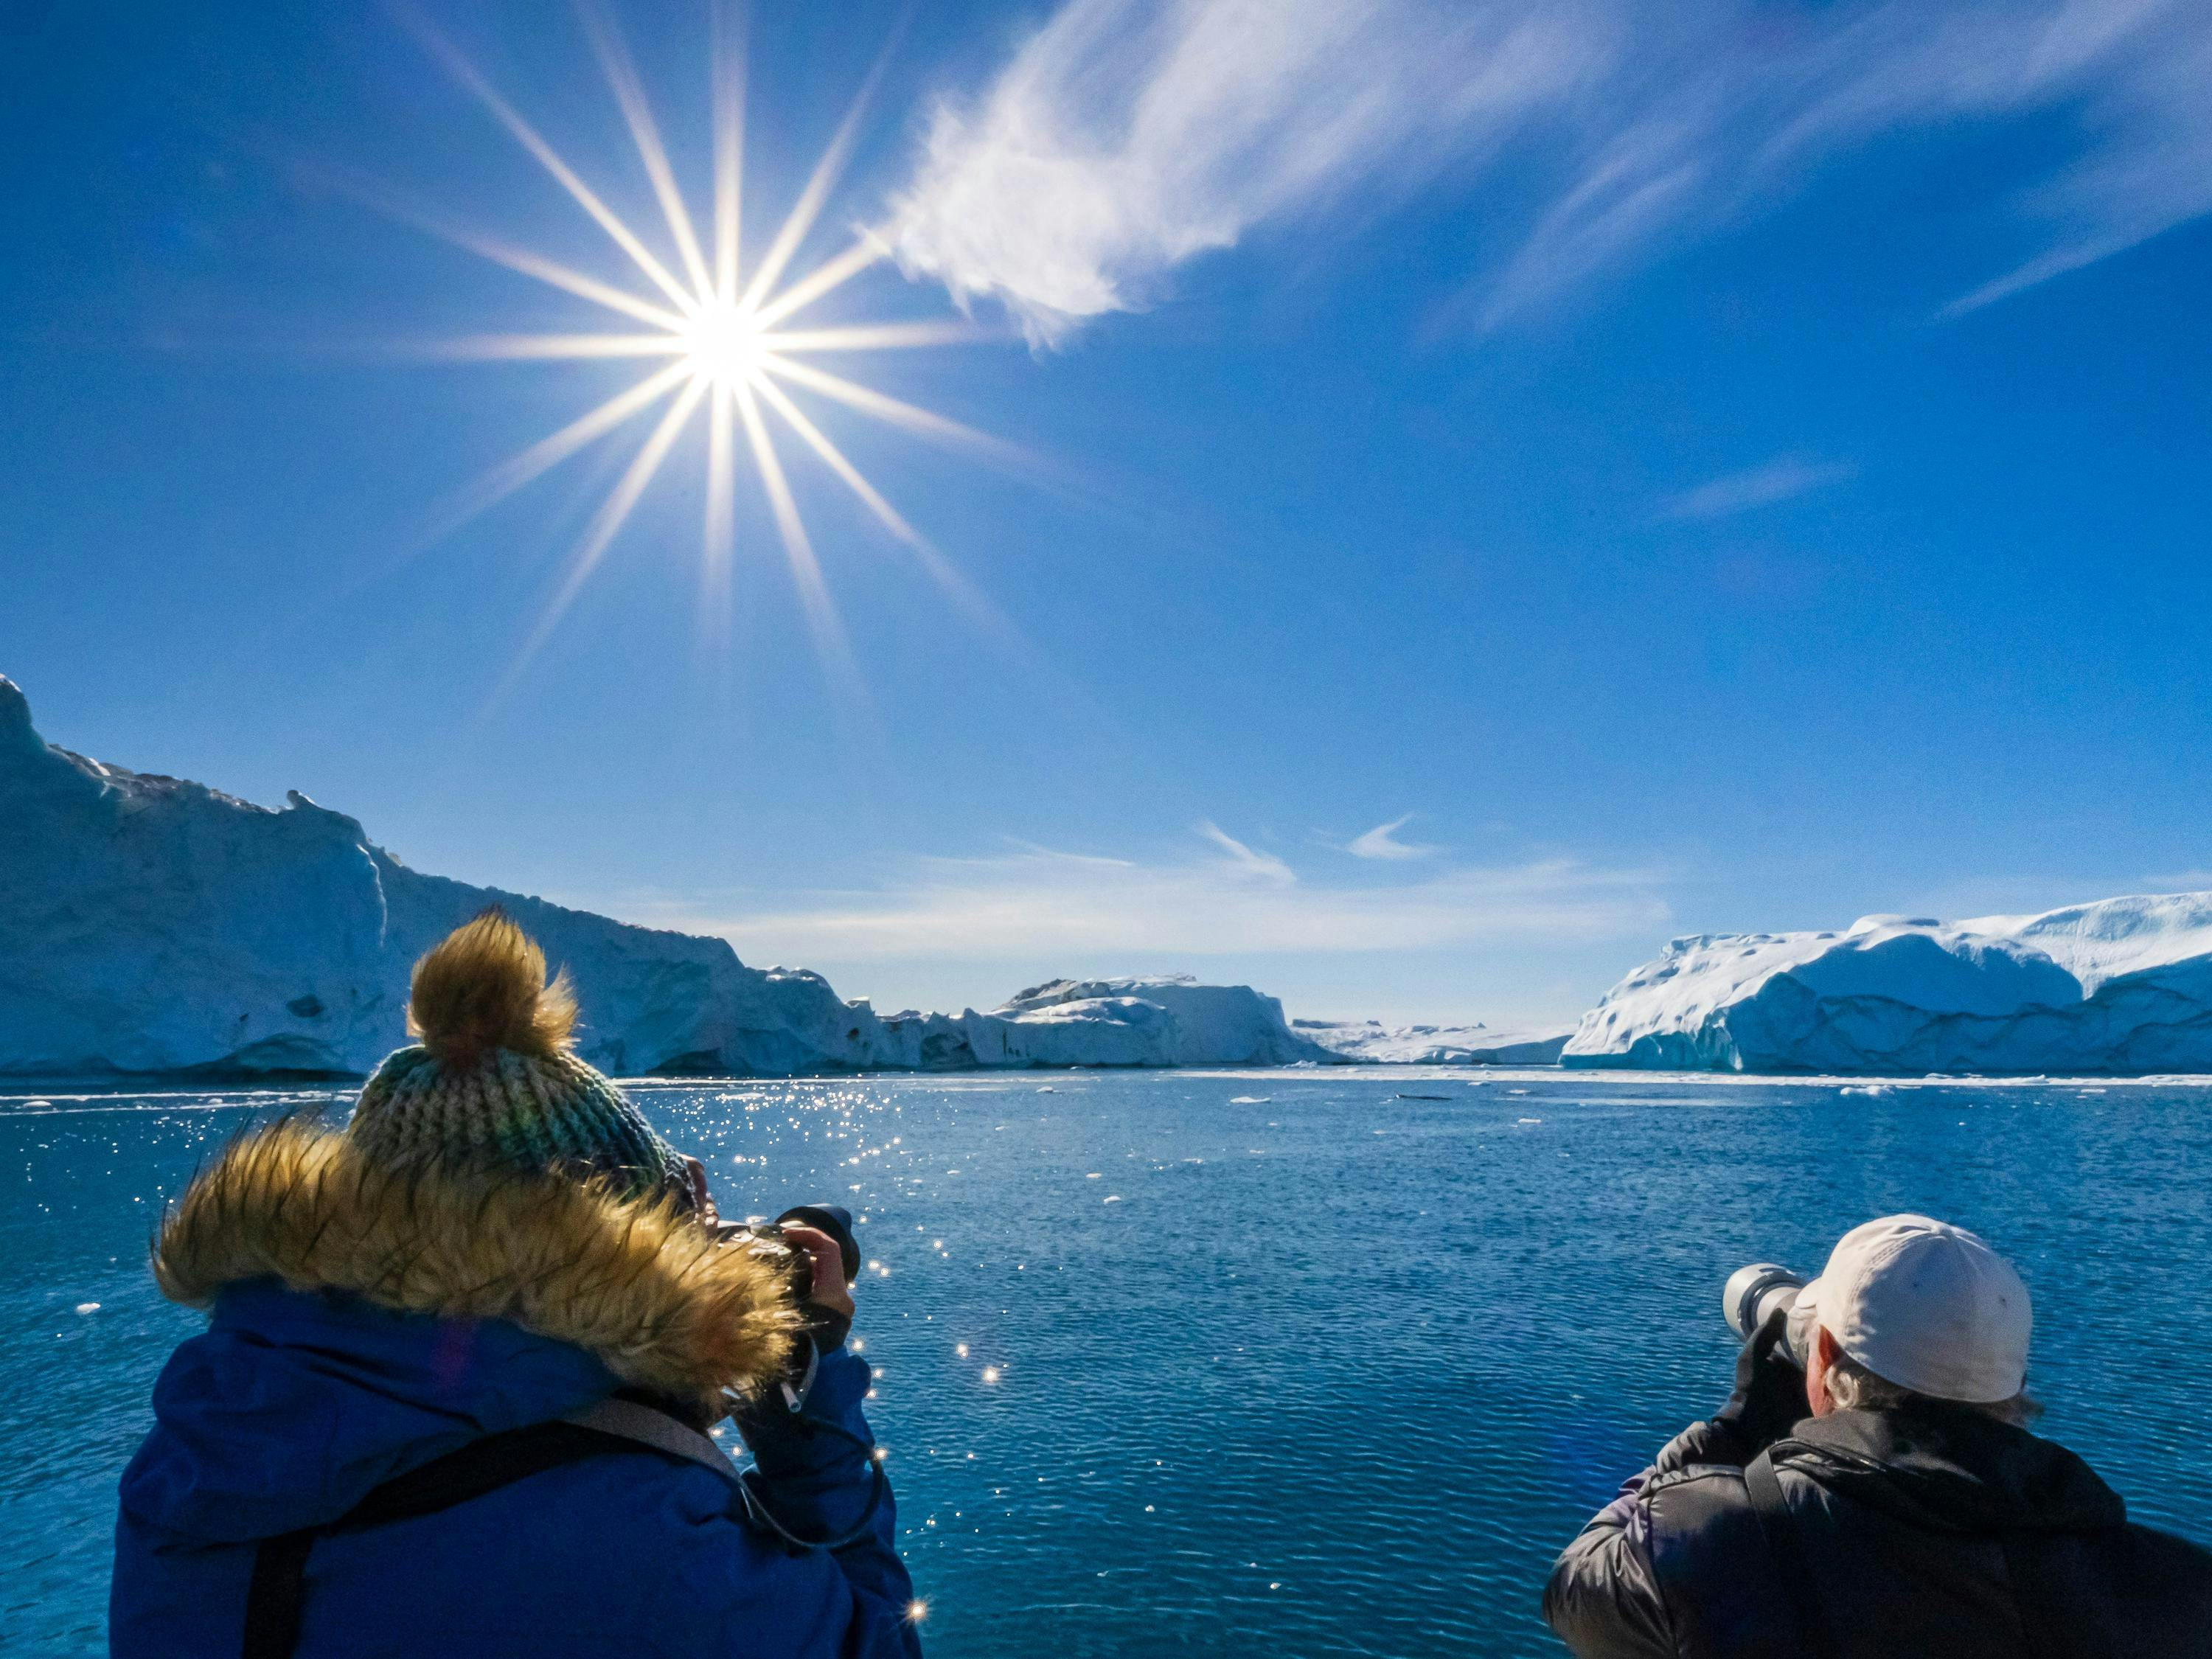 Guests photographing giant icebergs in Icefjord, Ilulissat, Greenland